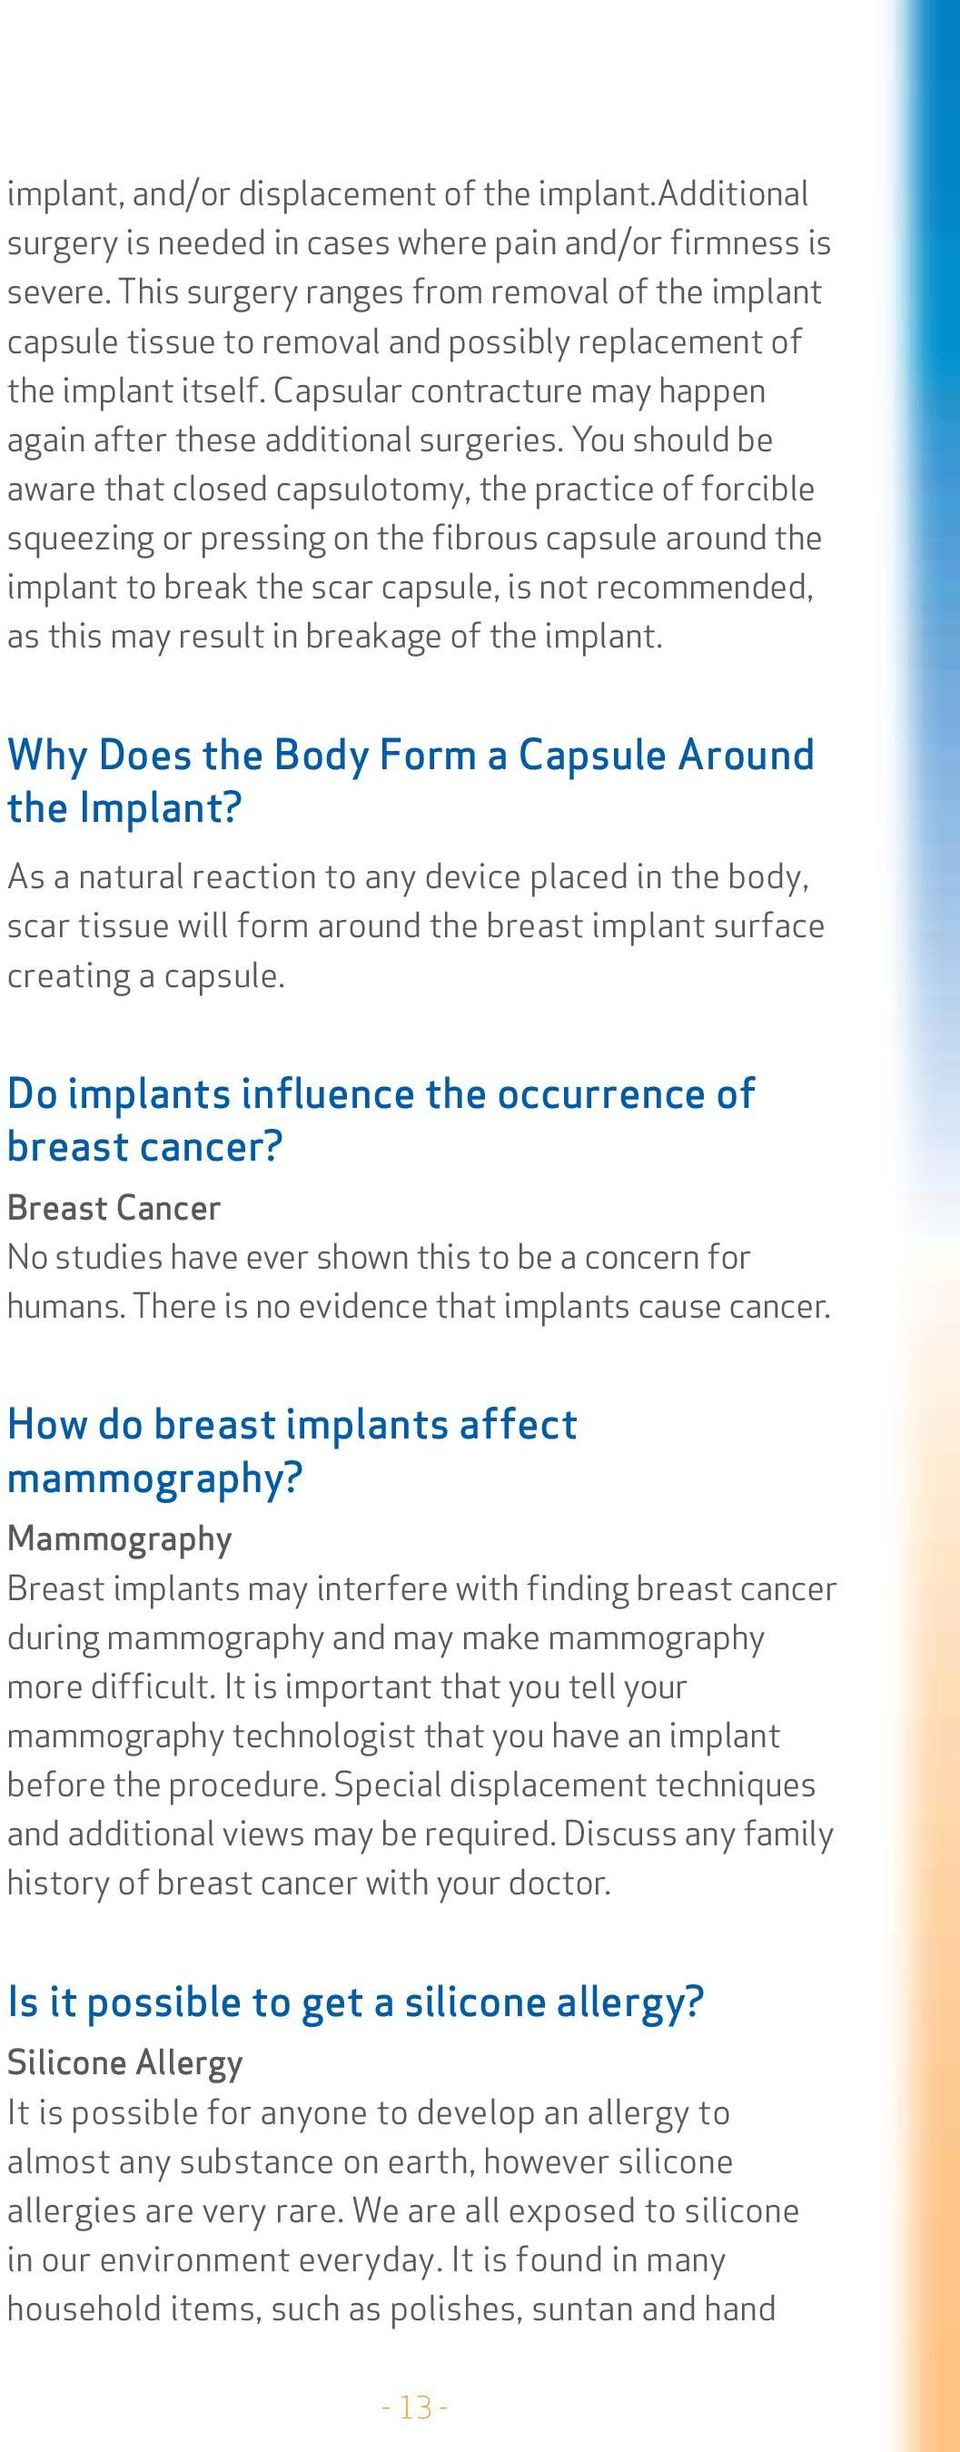 You should be aware that closed capsulotomy, the practice of forcible squeezing or pressing on the fibrous capsule around the implant to break the scar capsule, is not recommended, as this may result